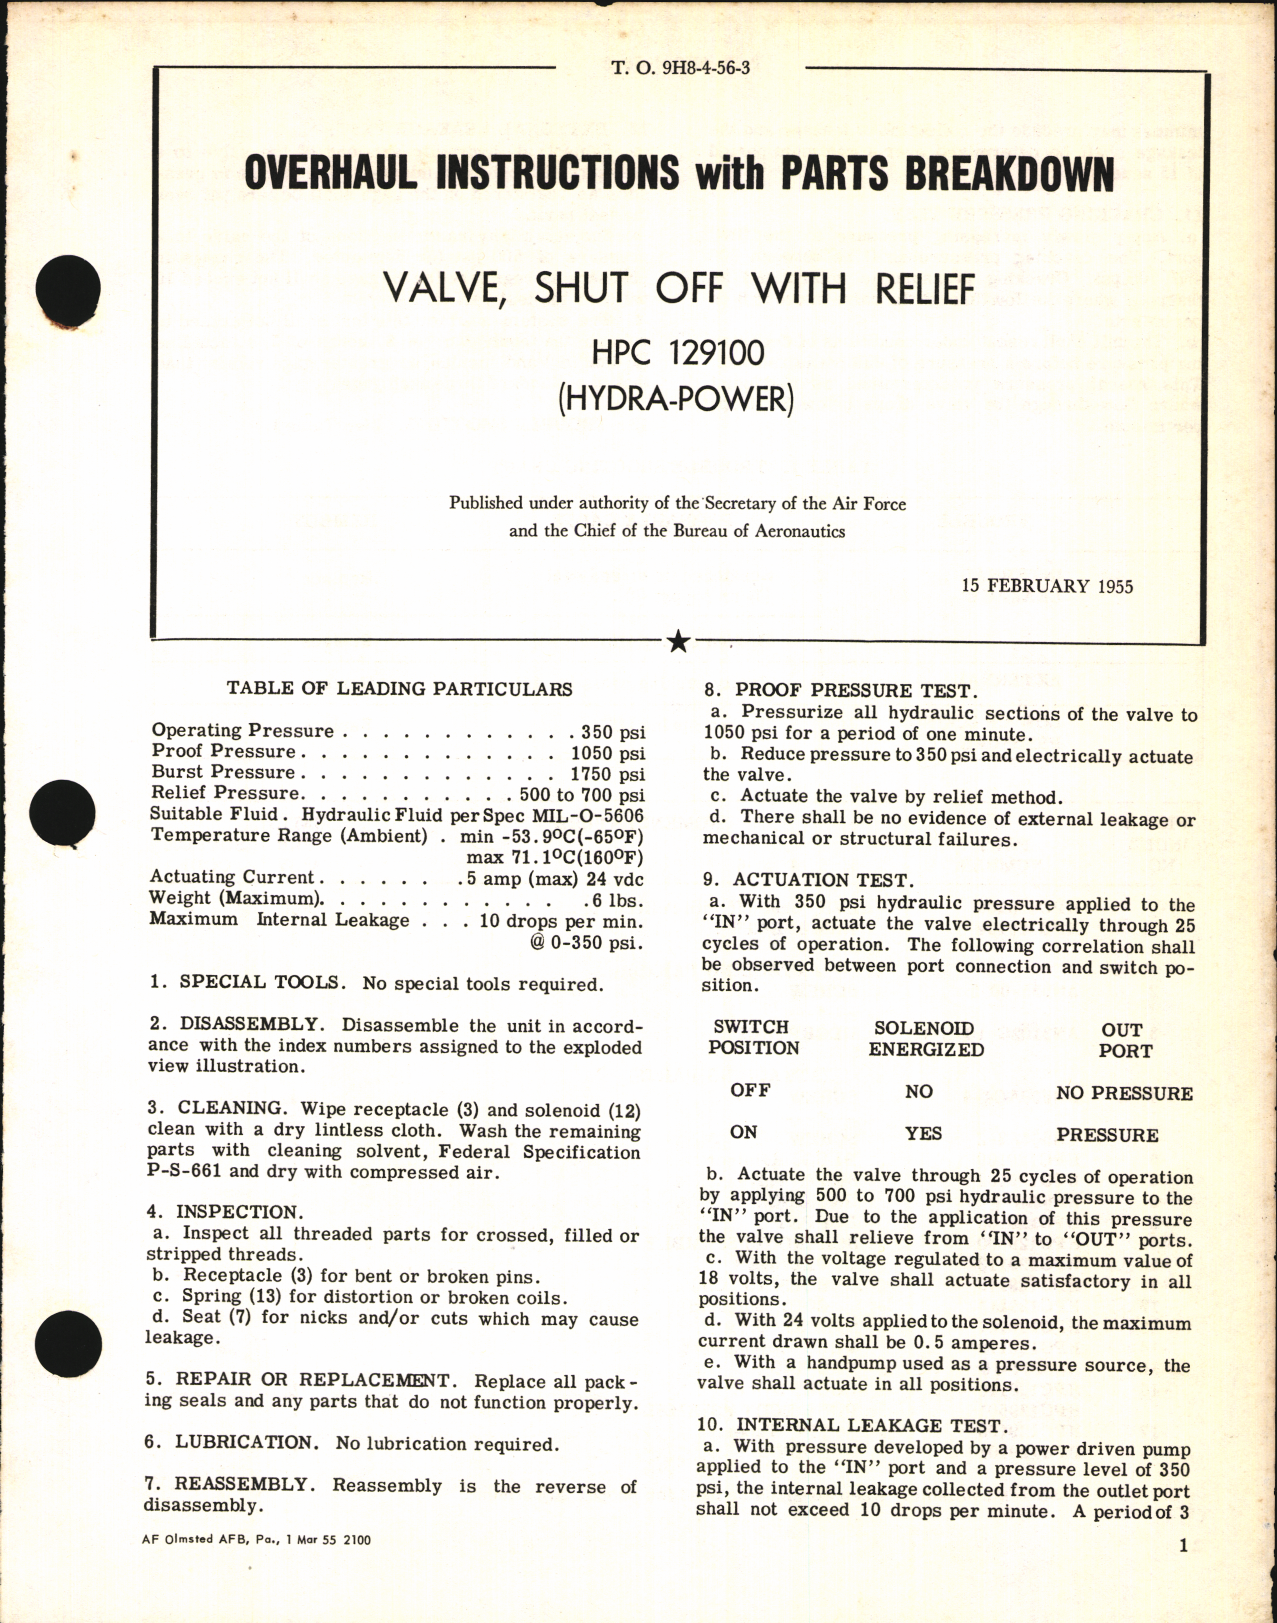 Sample page 1 from AirCorps Library document: Overhaul Instructions with Parts Breakdown for Valve, Shut Off with relief HPC 129100